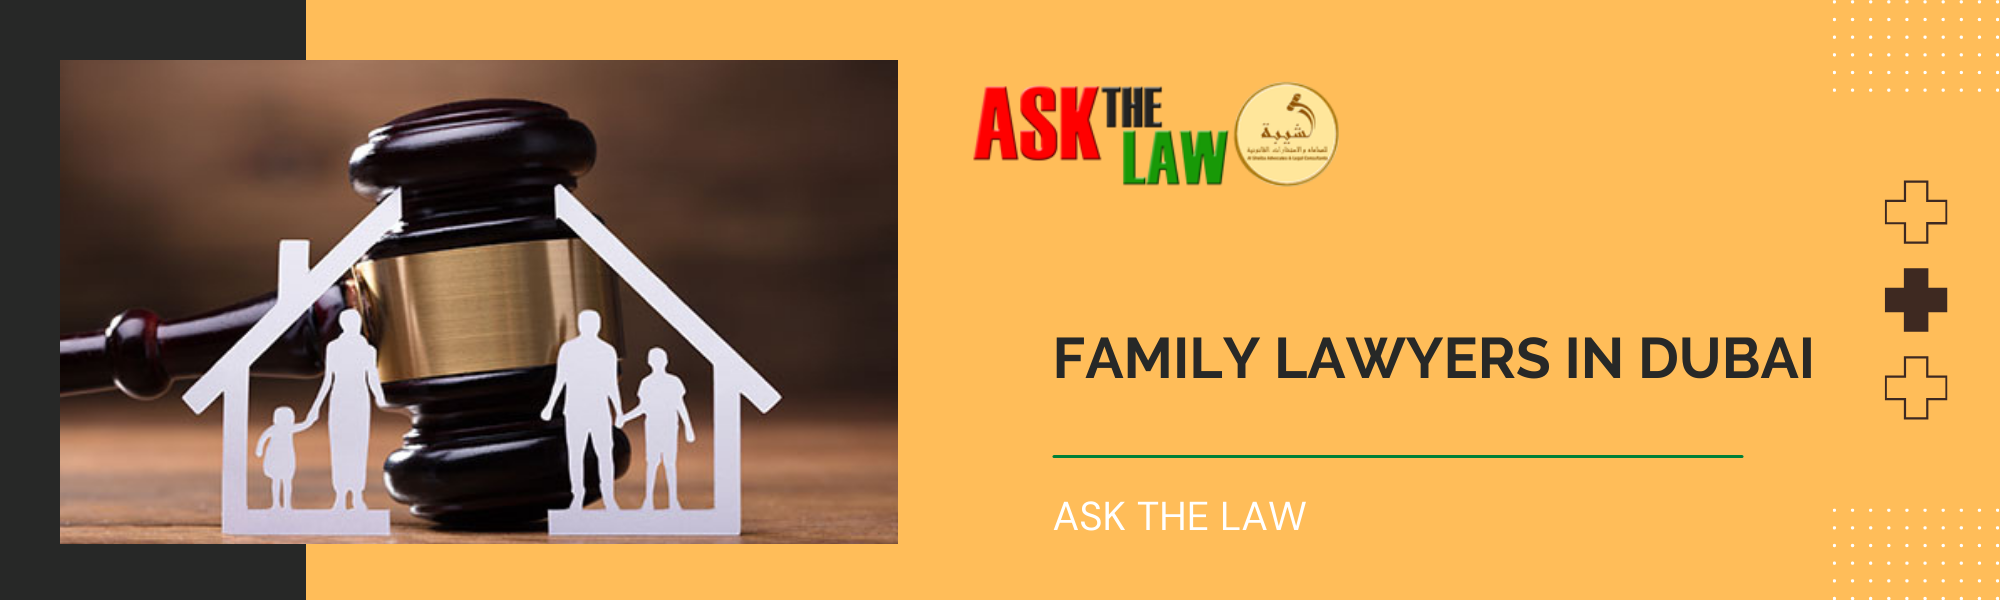 Family Lawyers in Dubai | Marriage, Divorce Alimony and Child Custody cover